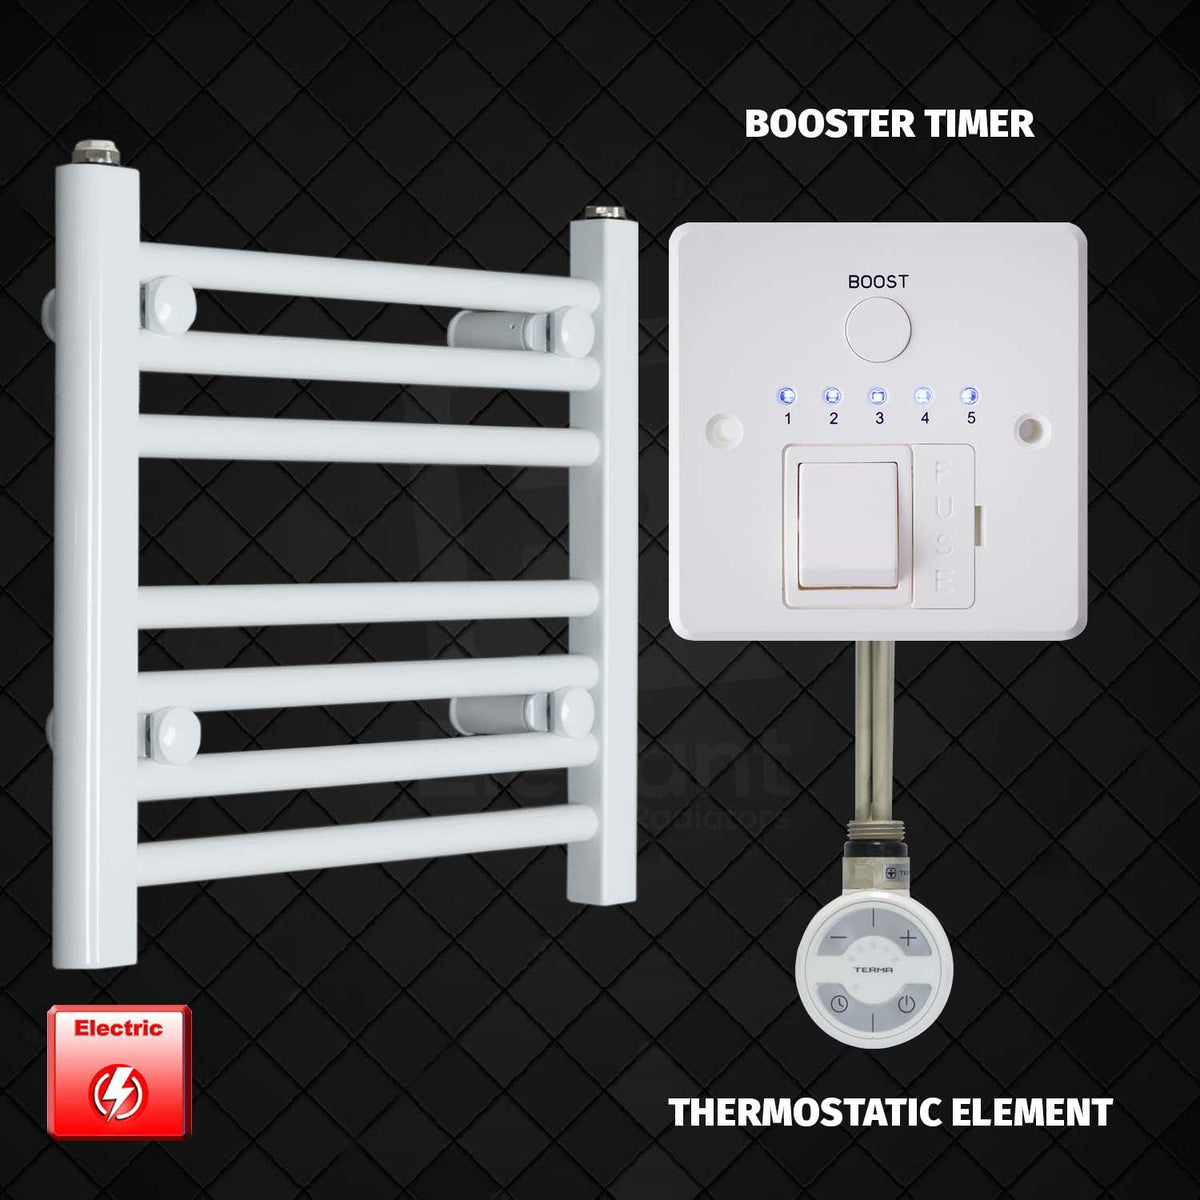 400 mm High 500 mm Wide Pre-Filled Electric Heated Towel Rail Radiator White HTR MOA Booster Timer Thermostatic Element